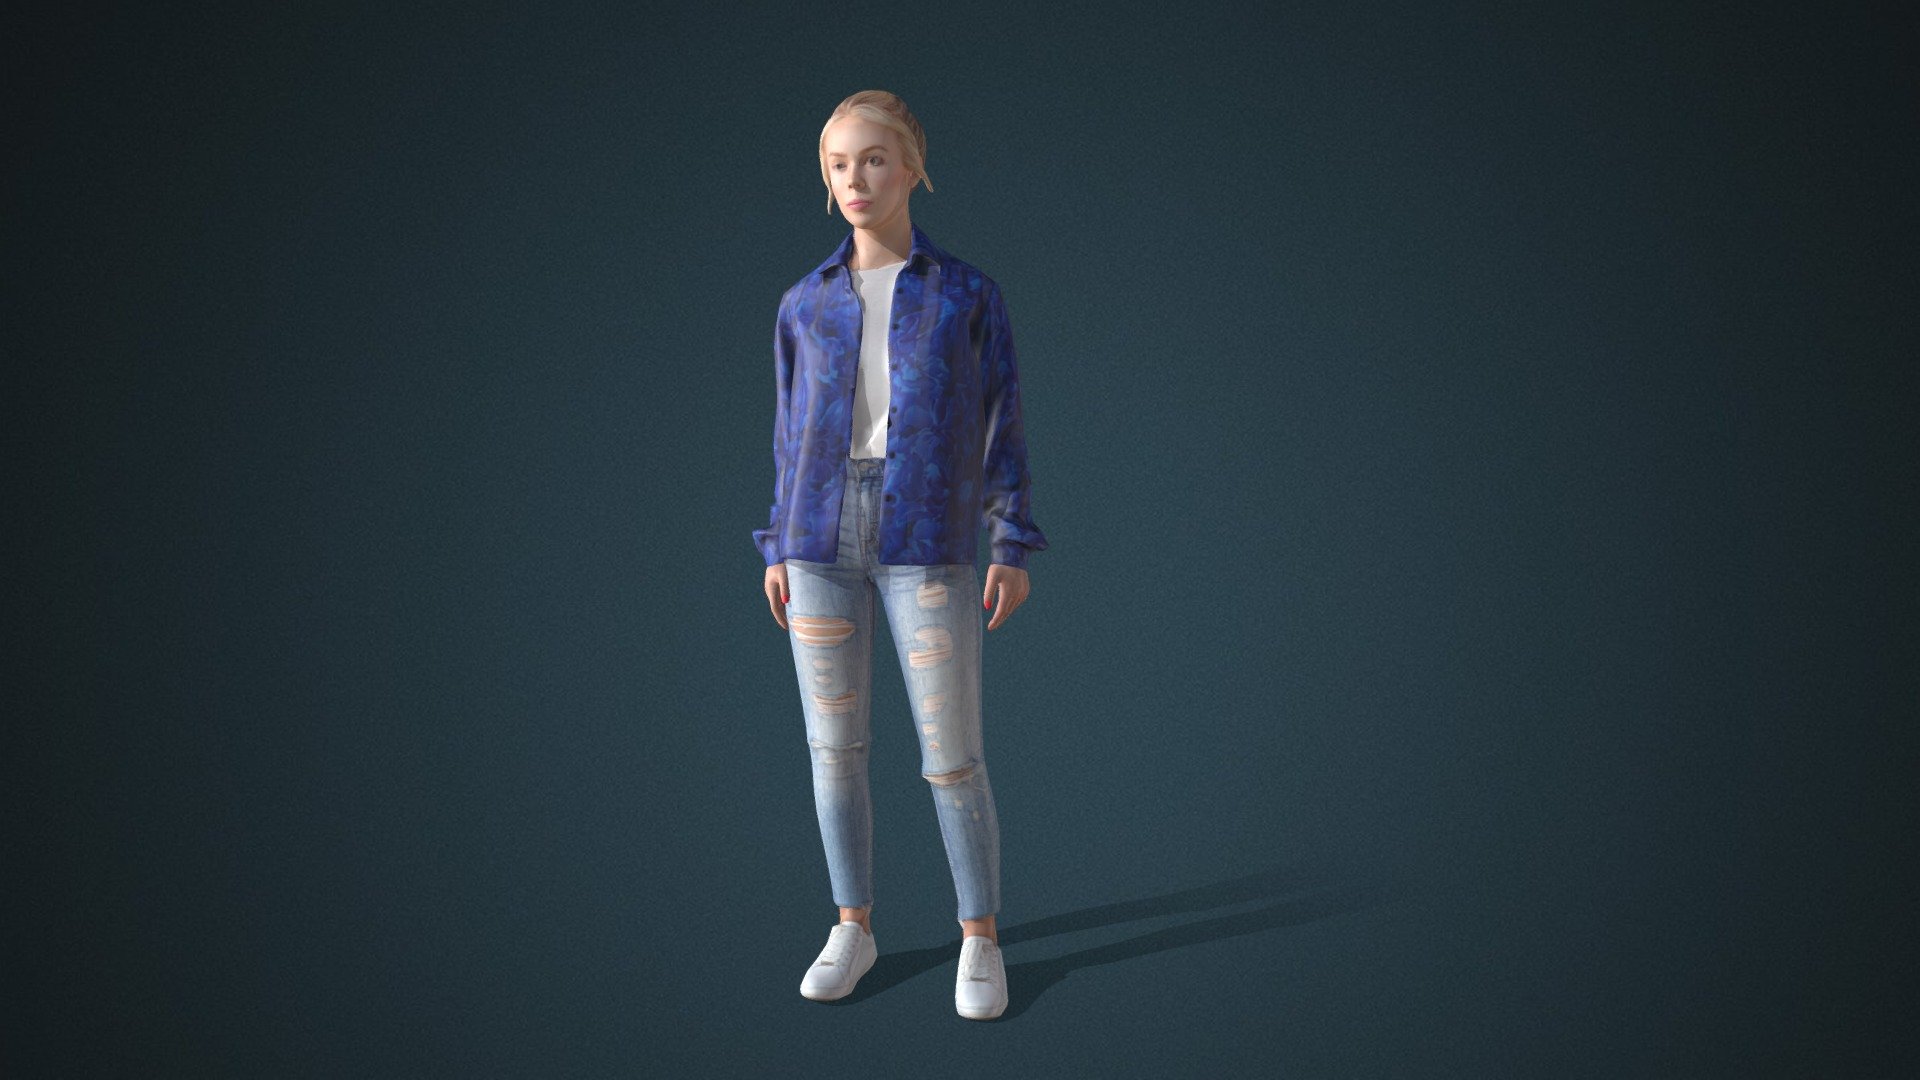 Do you like this model?  Free Download more models, motions and auto rigging tool AccuRIG (Value: $150+) on ActorCore
 

This model includes 2 mocap animations: Modern_F_Idle,Modern_F_Walk. Get more free motions



Design for high-performance crowd animation.

Buy full pack and Save 20%+: Young Fashion Vol.3


SPECIFICATIONS

✔ Geometry : 7K~10K Quads, one mesh

✔ Material : One material with changeable colors.

✔ Texture Resolution : 4K

✔ Shader : PBR, Diffuse, Normal, Roughness, Metallic, Opacity

✔ Rigged : Facial and Body (shoulders, fingers, toes, eyeballs, jaw)

✔ Blendshape : 122 for facial expressions and lipsync

✔ Compatible with iClone AccuLips, Facial ExPlus, and traditional lip-sync.


About Reallusion ActorCore

ActorCore offers the highest quality 3D asset libraries for mocap motions and animated 3D humans for crowd rendering 3d model